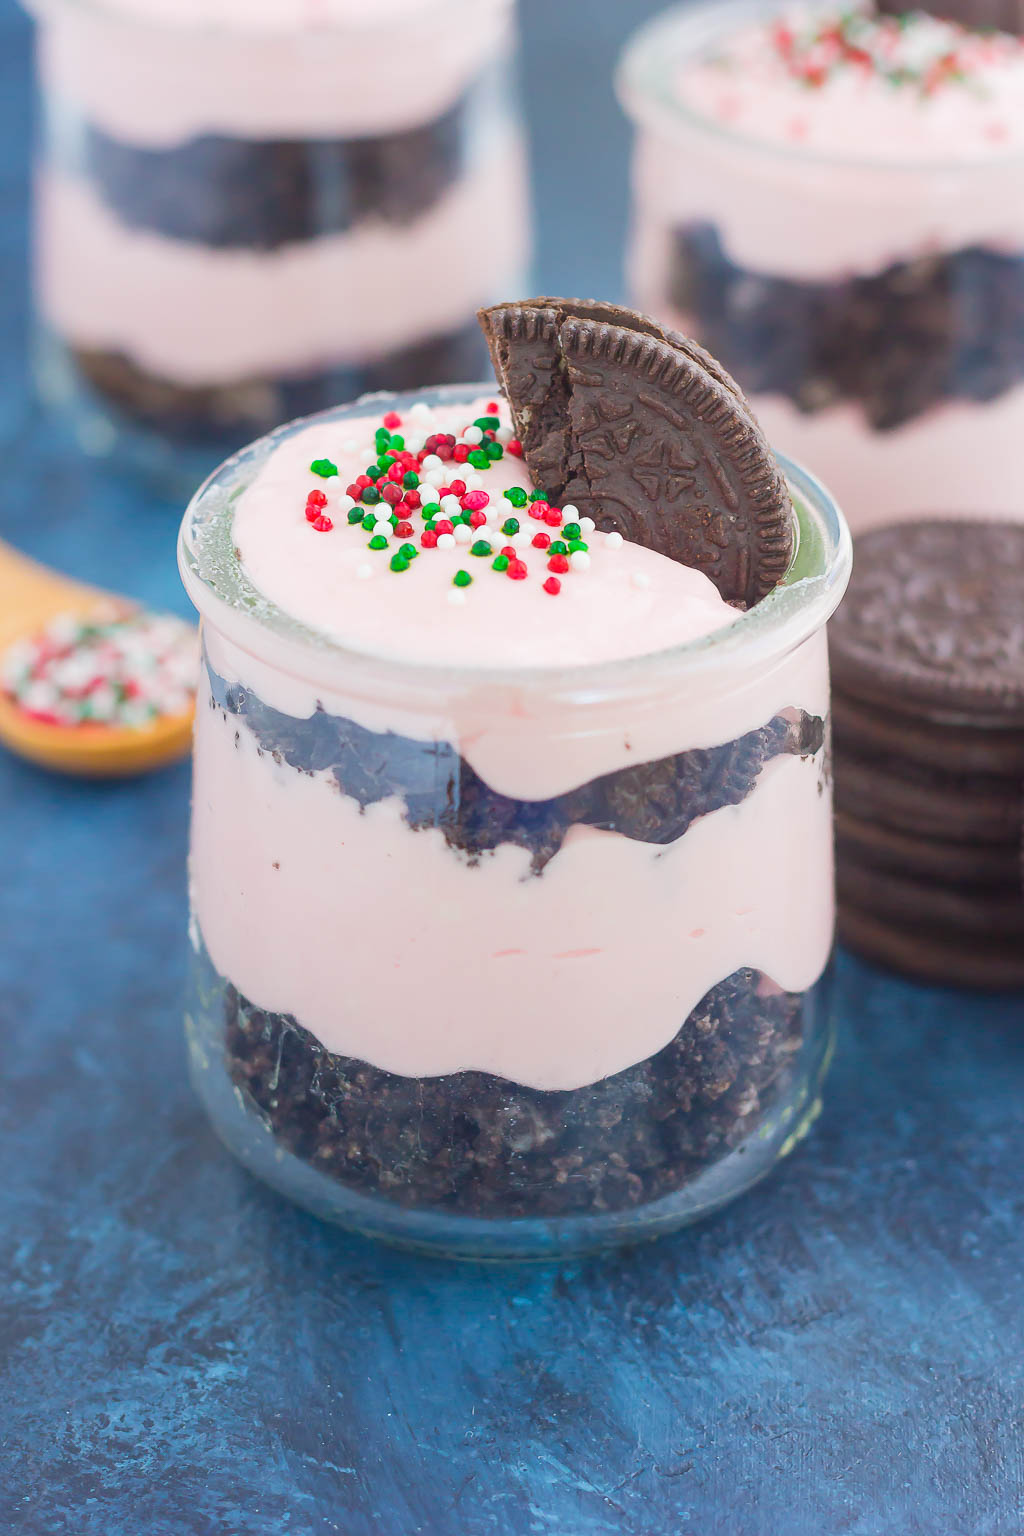 This No-Bake Peppermint Oreo Cheesecake features a sweet and creamy peppermint cheesecake batter that requires no oven. A rich, Oreo cookie crust and festive sprinkles make this cheesecake perfect for the holidays!